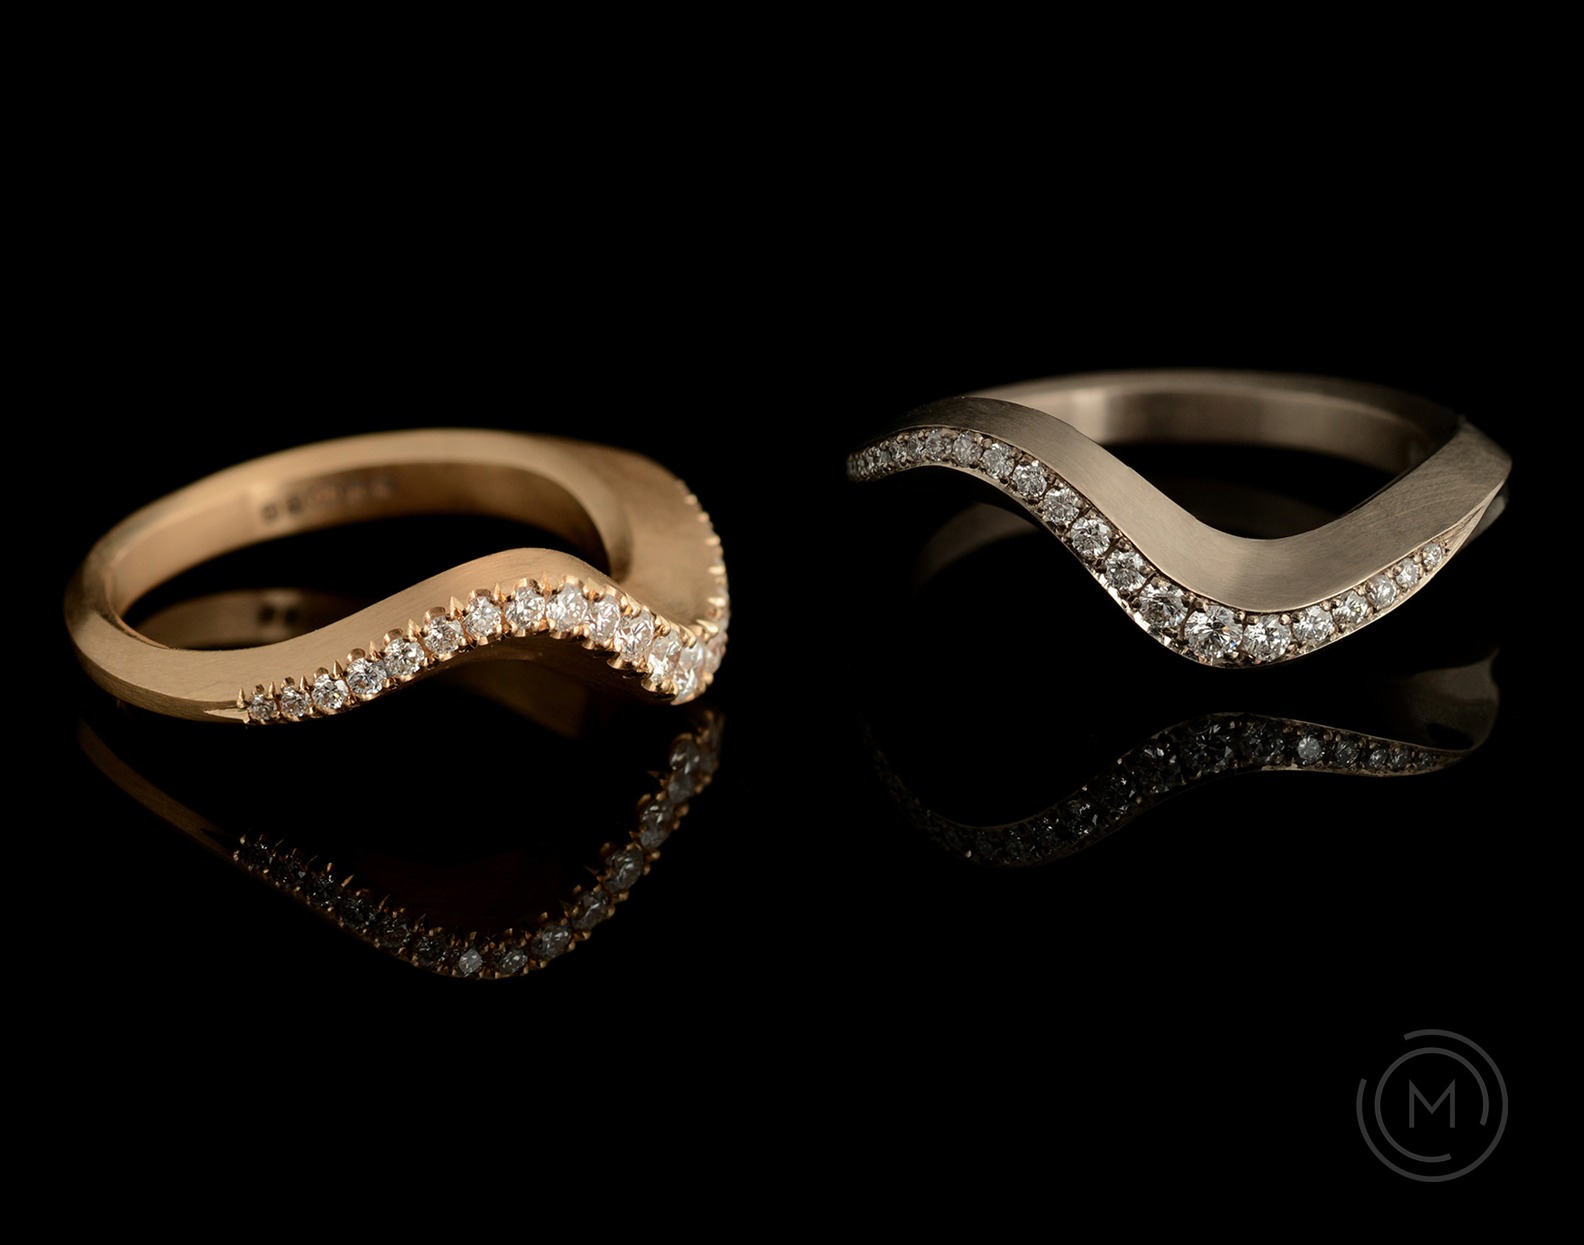 Arris carved white and rose gold diamond wedding rings